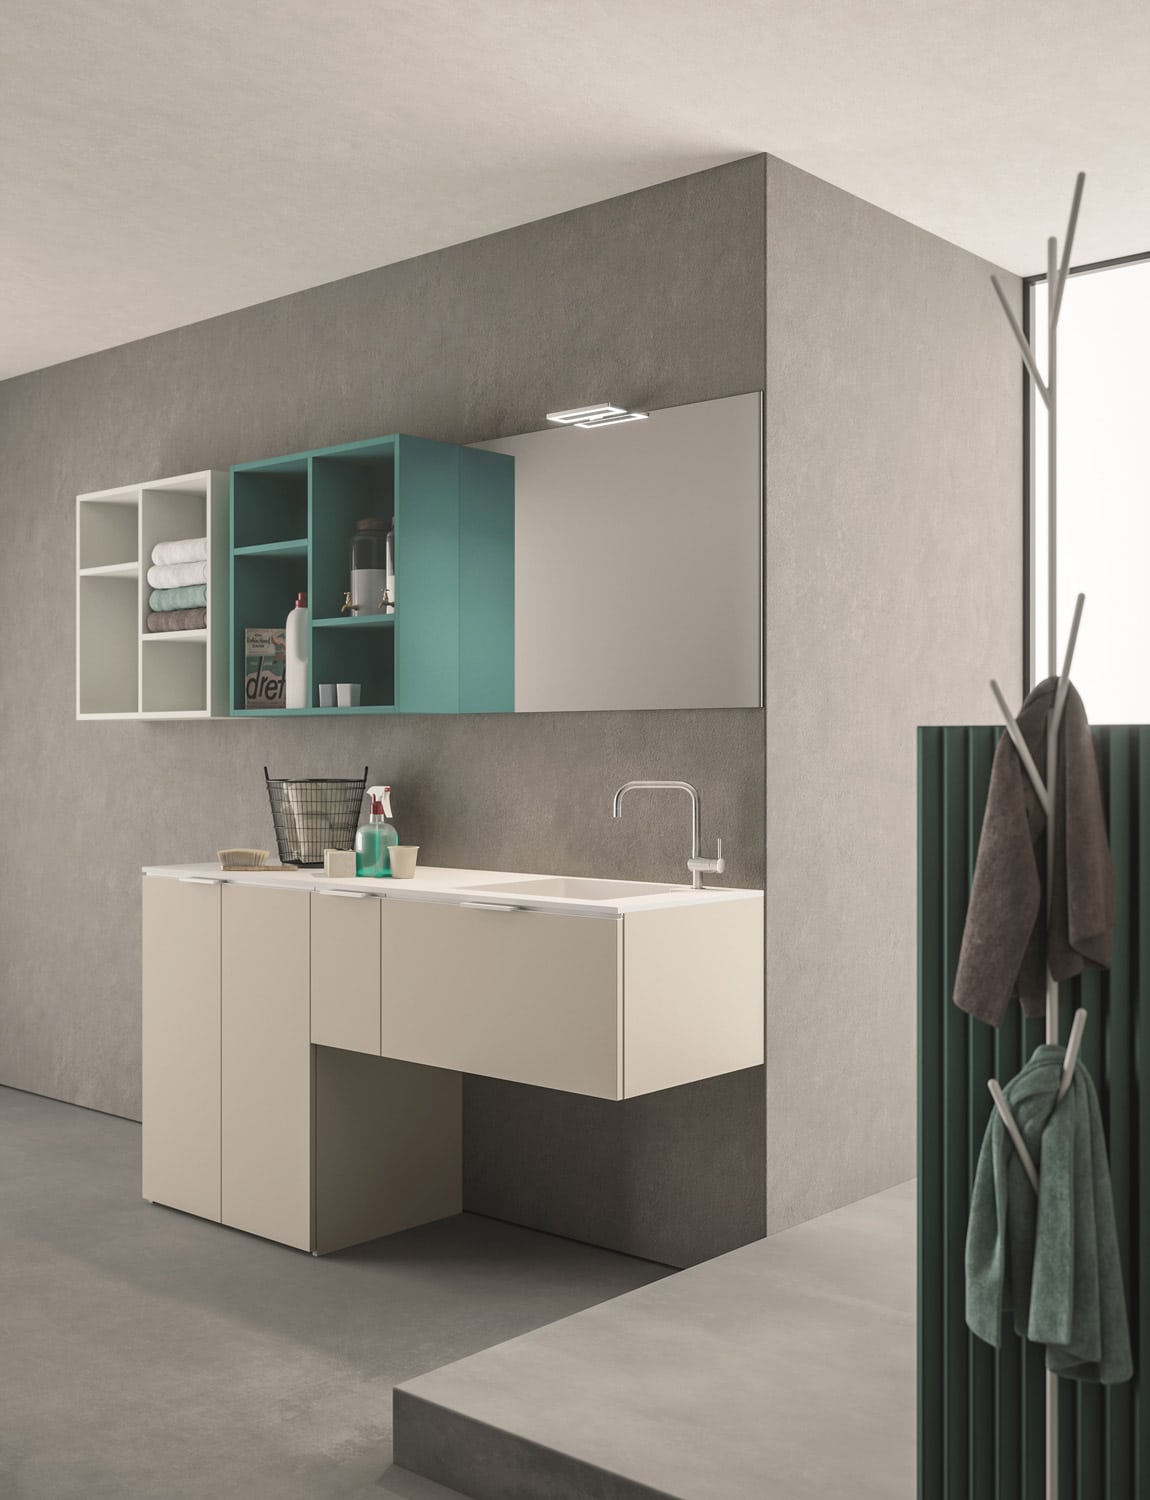 Base cabinet and floating drawers in Sabbia matte lacquer. Open shelving units in Menta Turchese and White matte lacquer. Towel holder tree in white lacquered steel. 